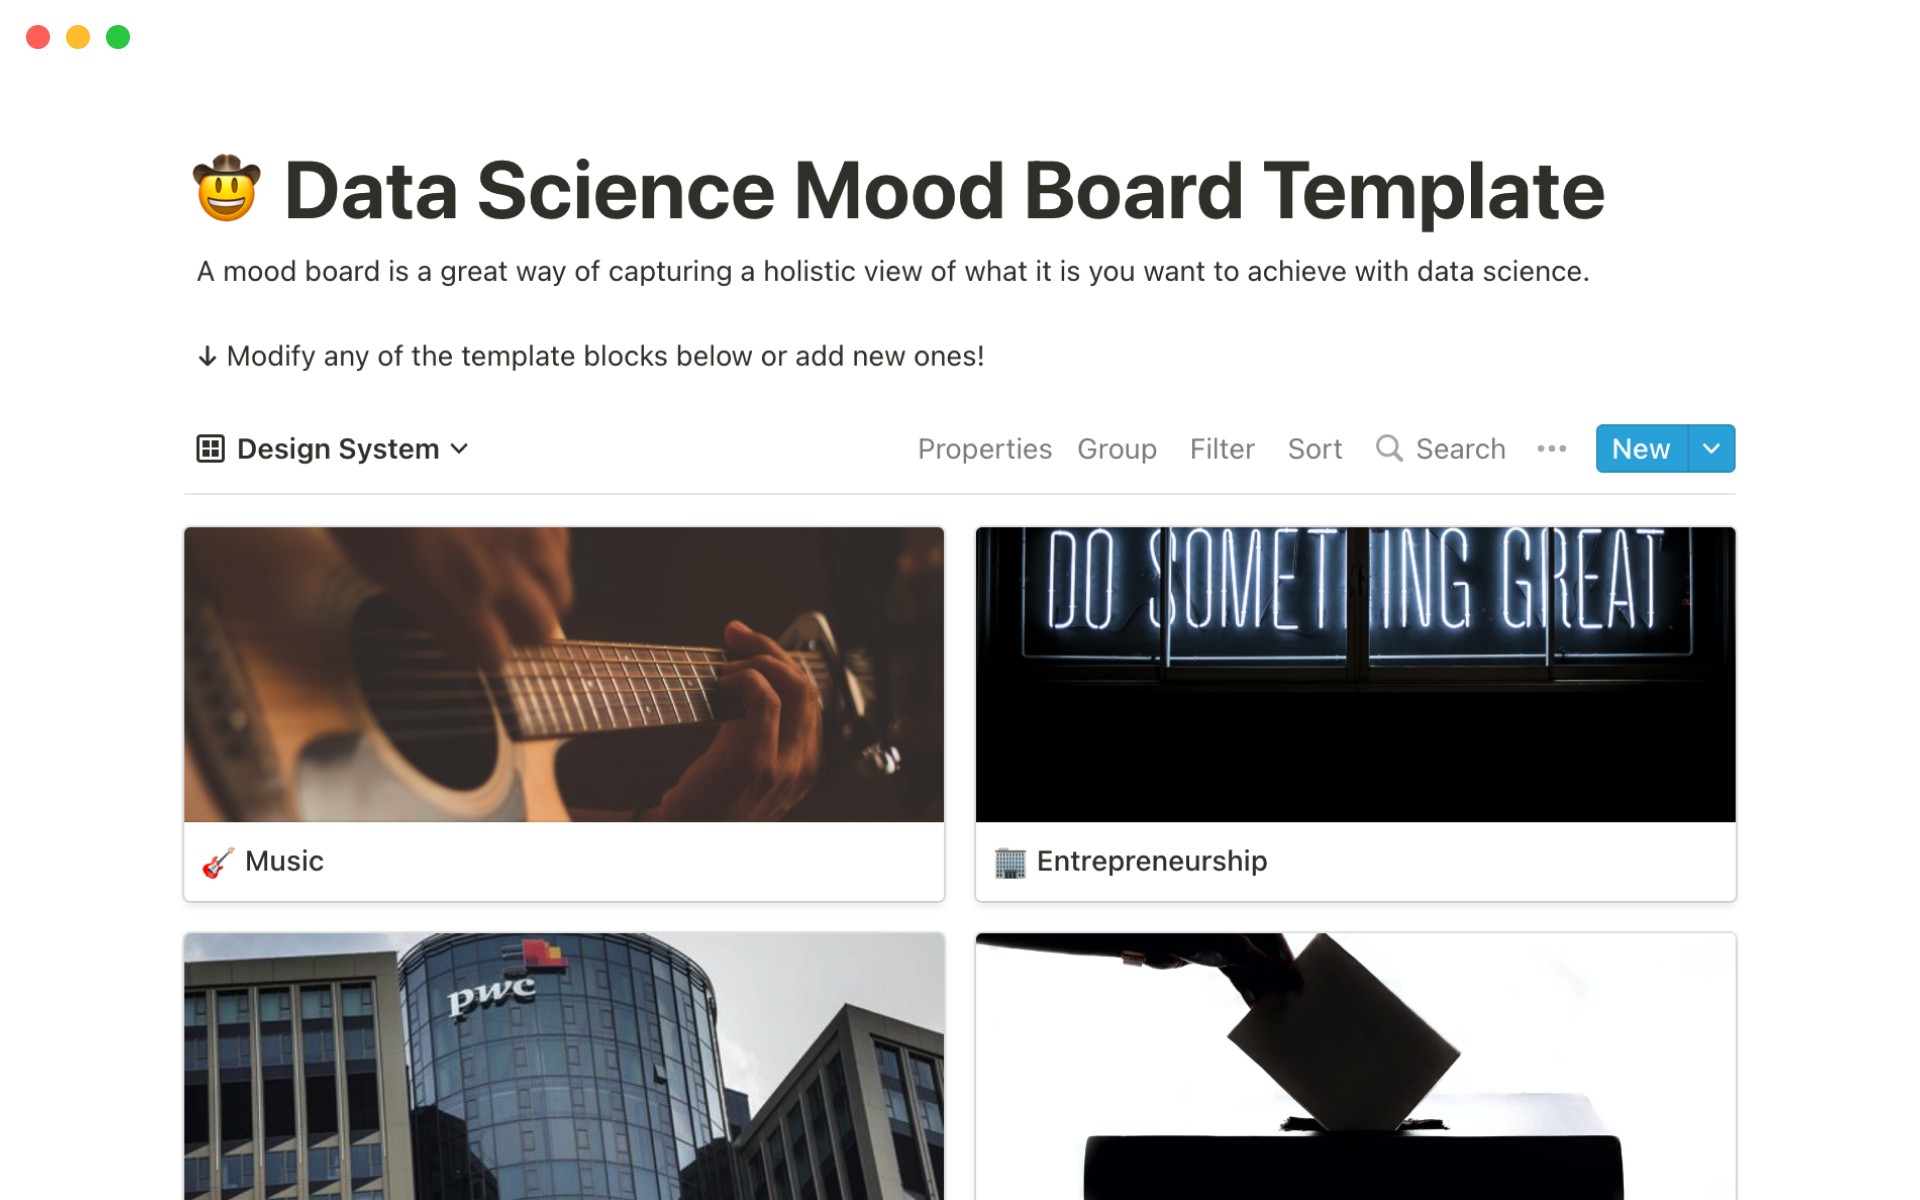 Templates for users to start building a data science portfolio.